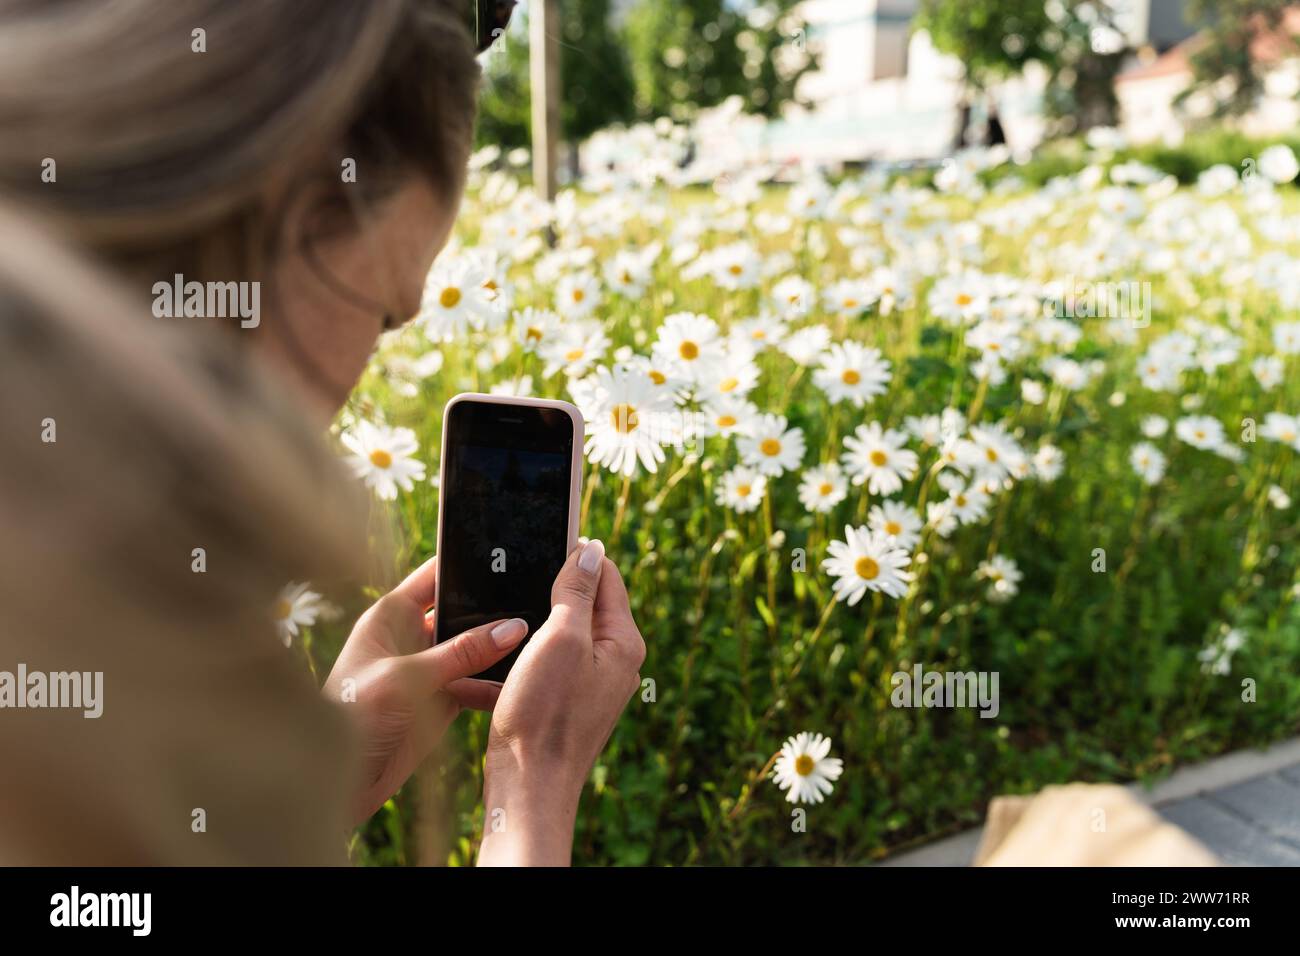 A woman takes a photo of flowering daisies on her smartphone Stock Photo